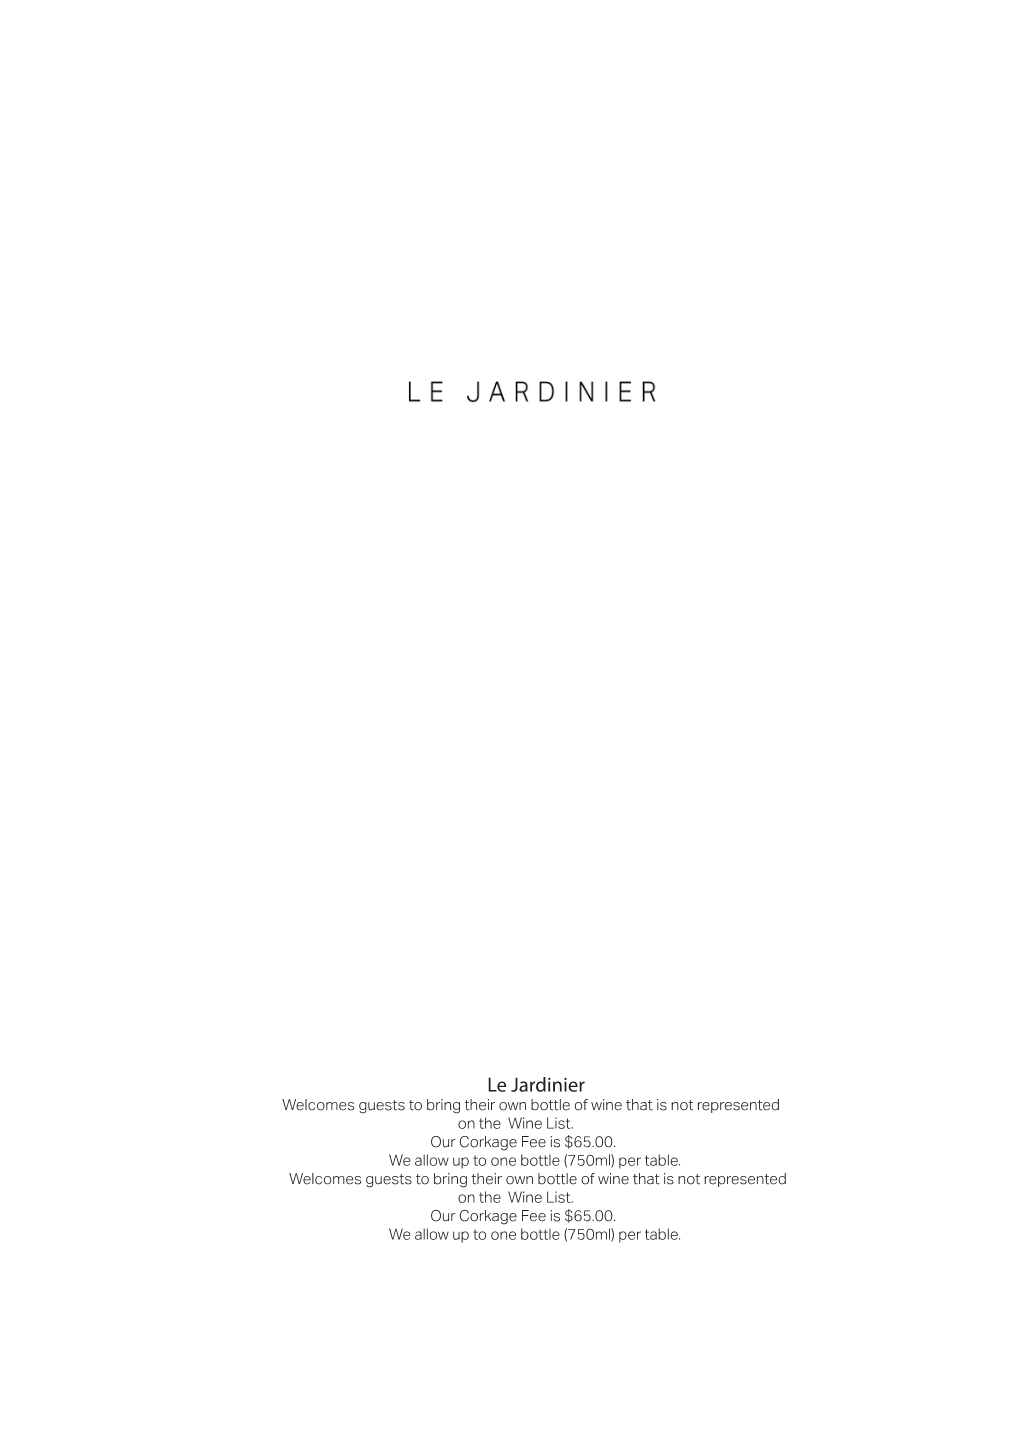 Le Jardinier Welcomes Guests to Bring Their Own Bottle of Wine That Is Not Represented on the Wine List